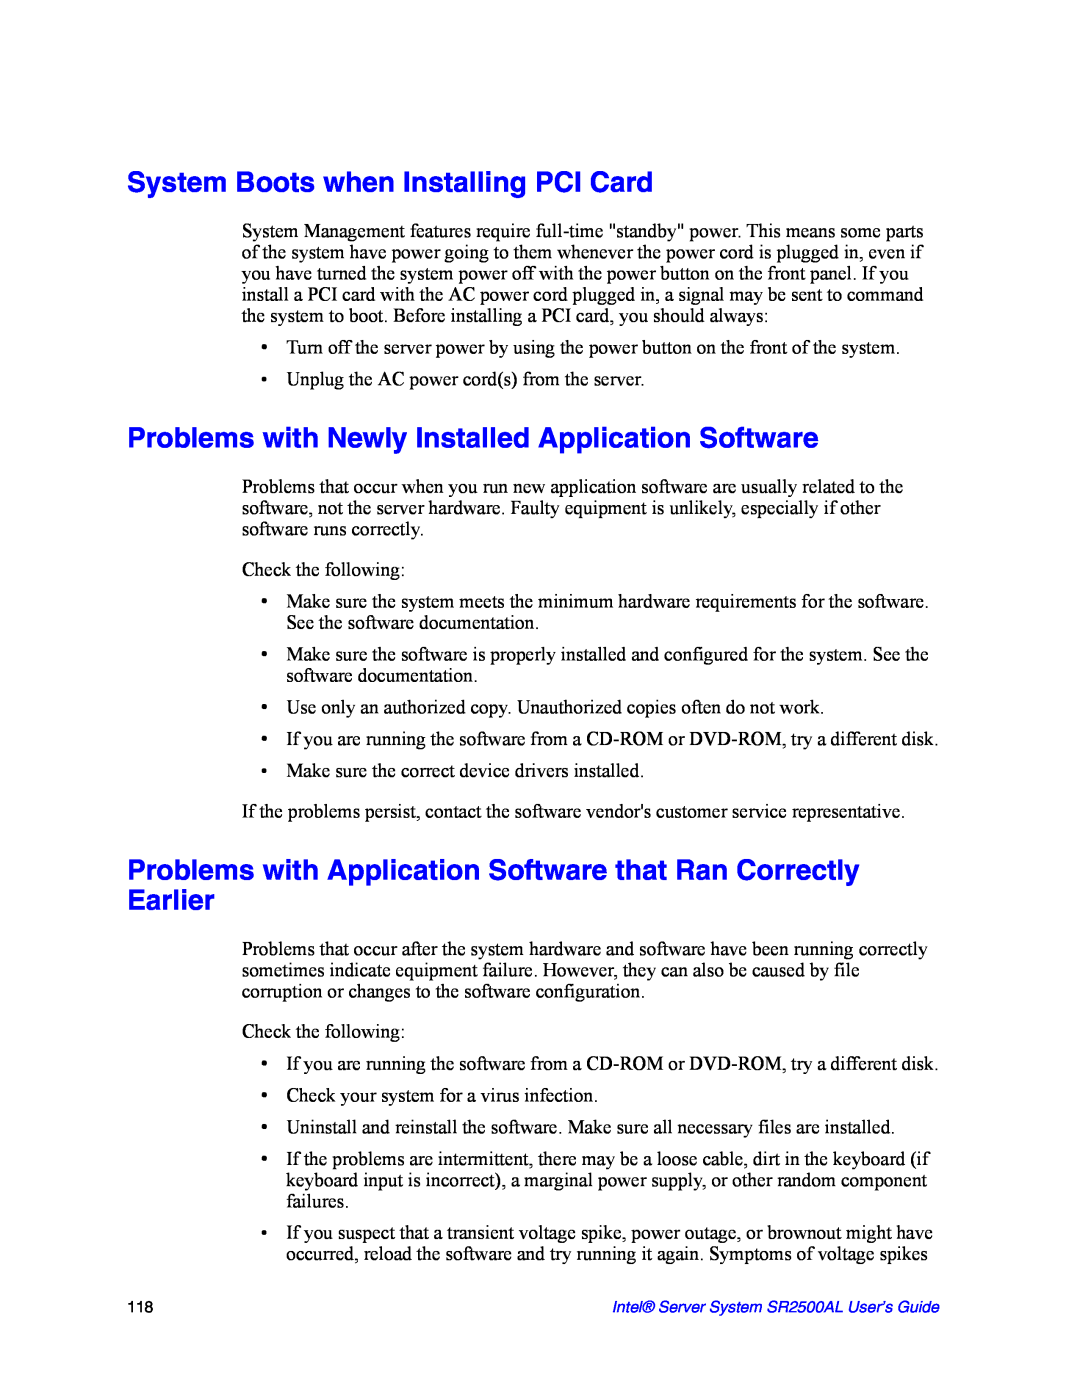 Intel SR2500AL manual System Boots when Installing PCI Card, Problems with Newly Installed Application Software 